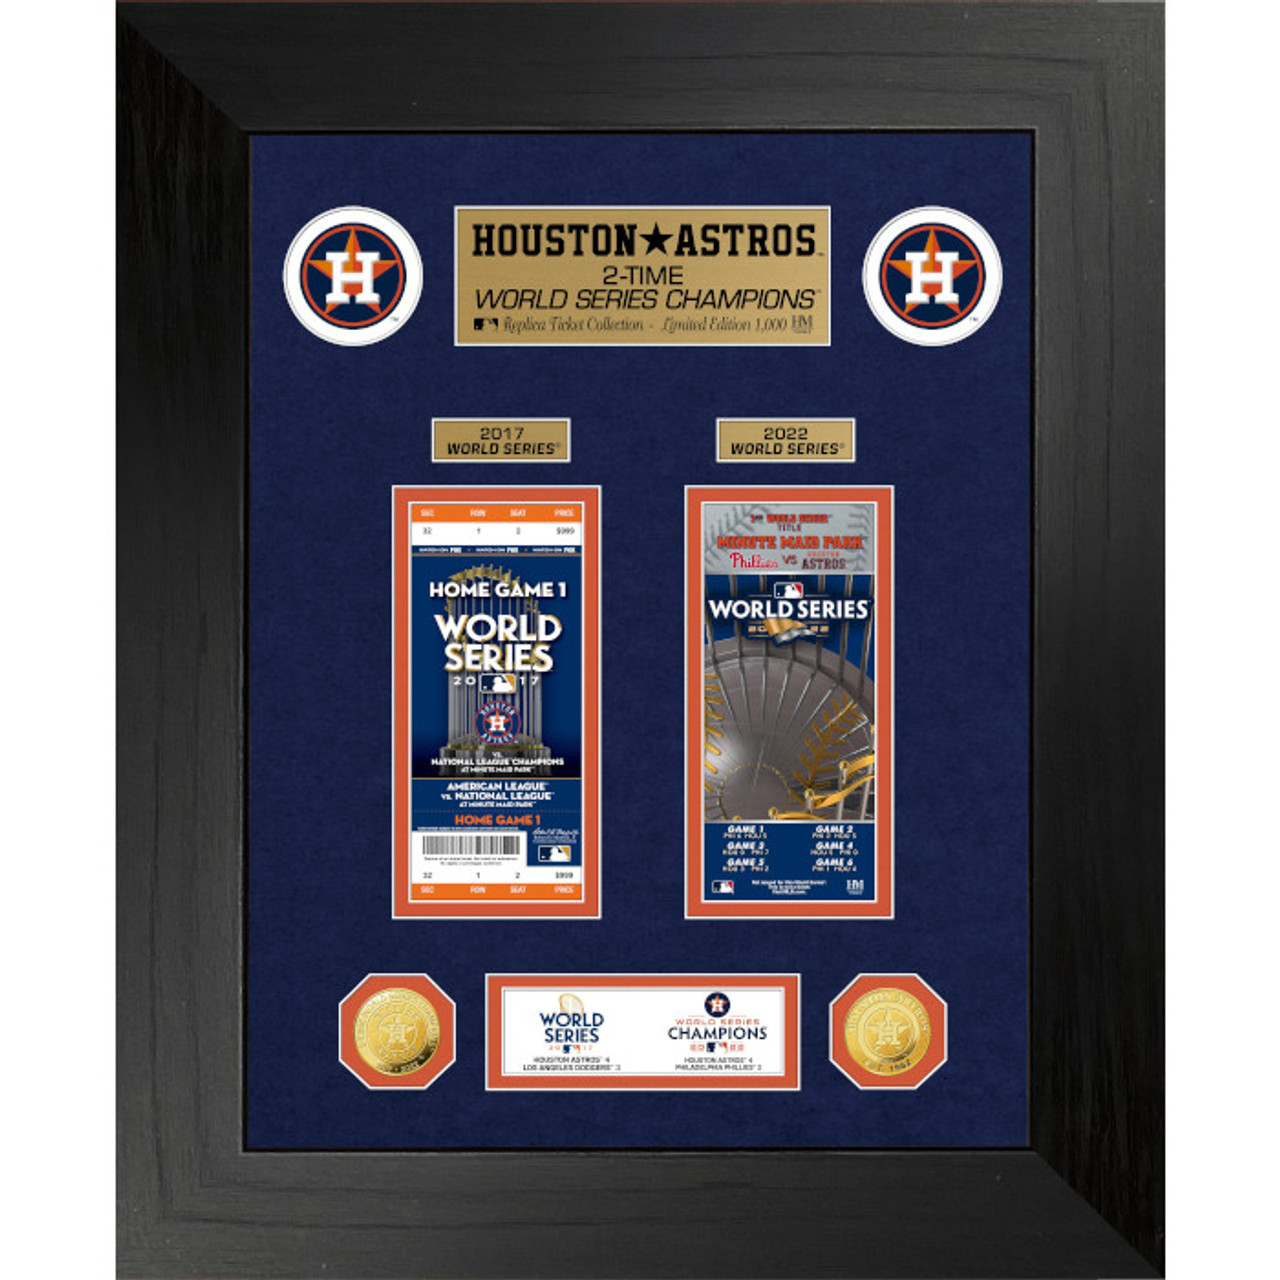 Houston Astros 2-Time World Series Champions Deluxe 18 x 22